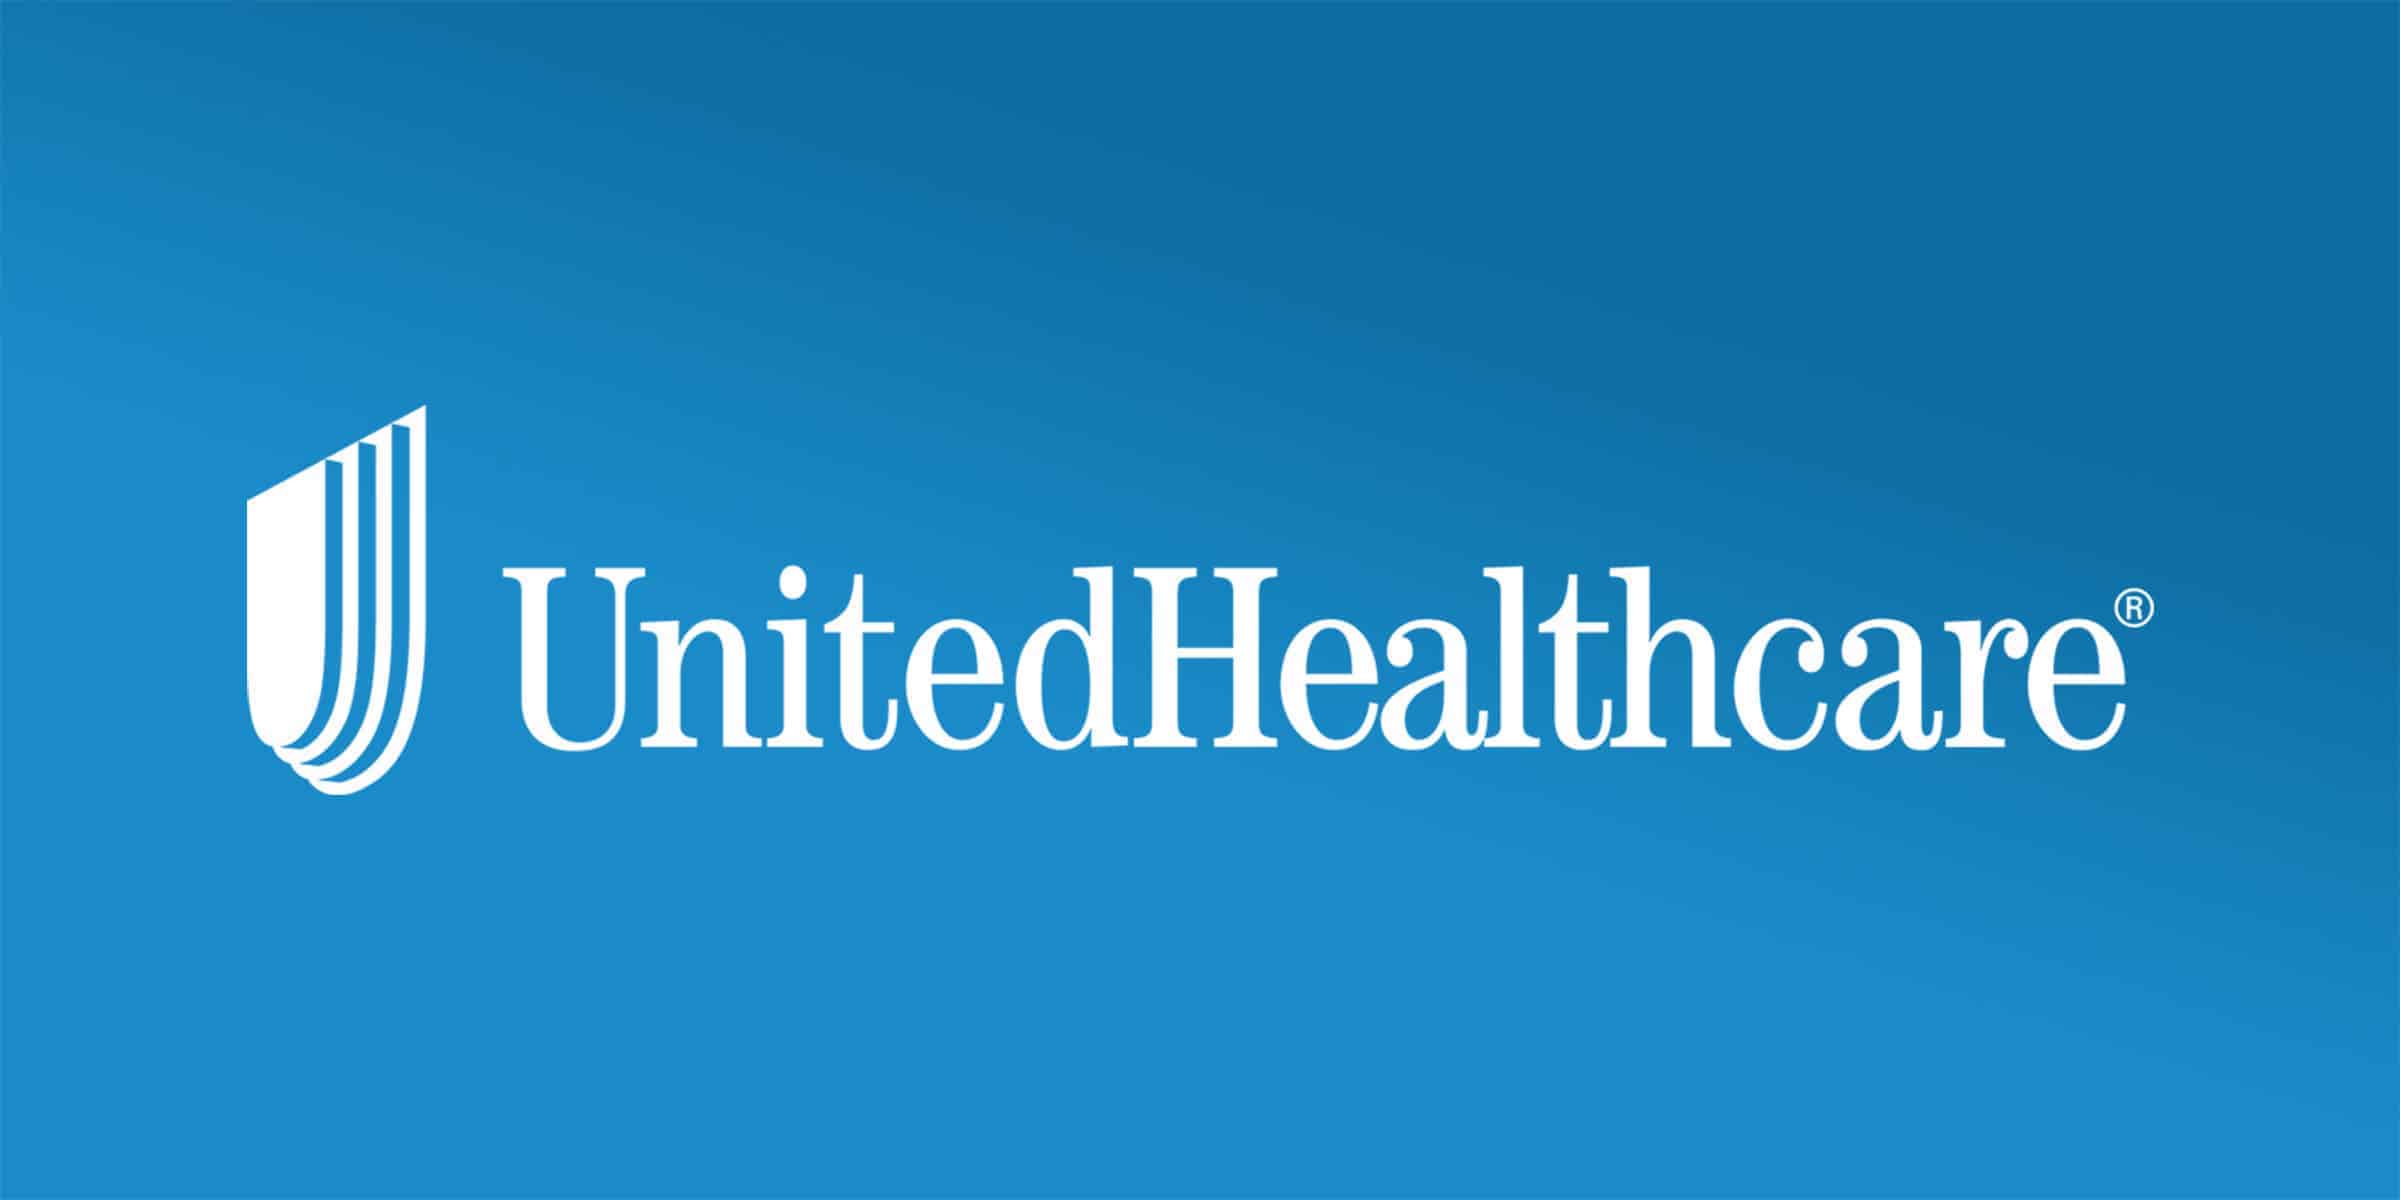 united-health-care-case-study-knowledge-powered-solutions-kps